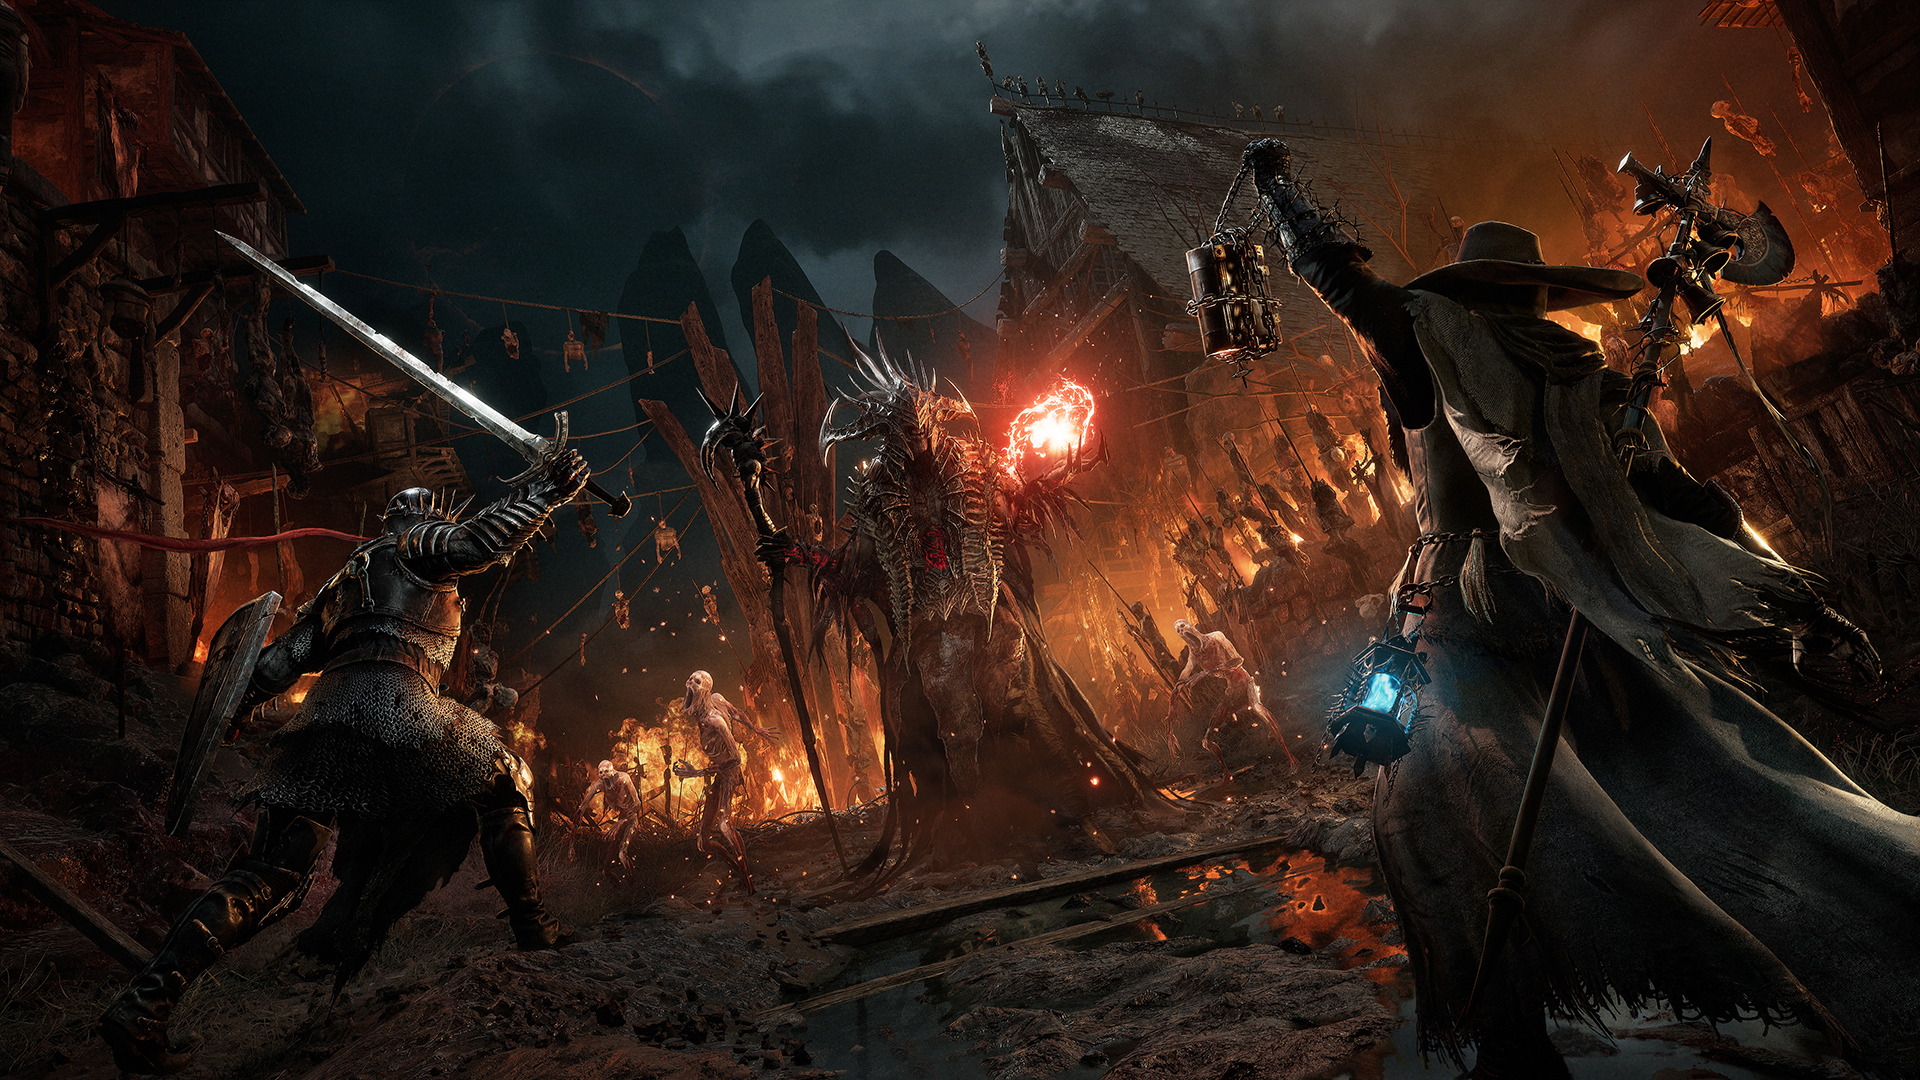 Lords of the Fallen 2 has a new developer, again